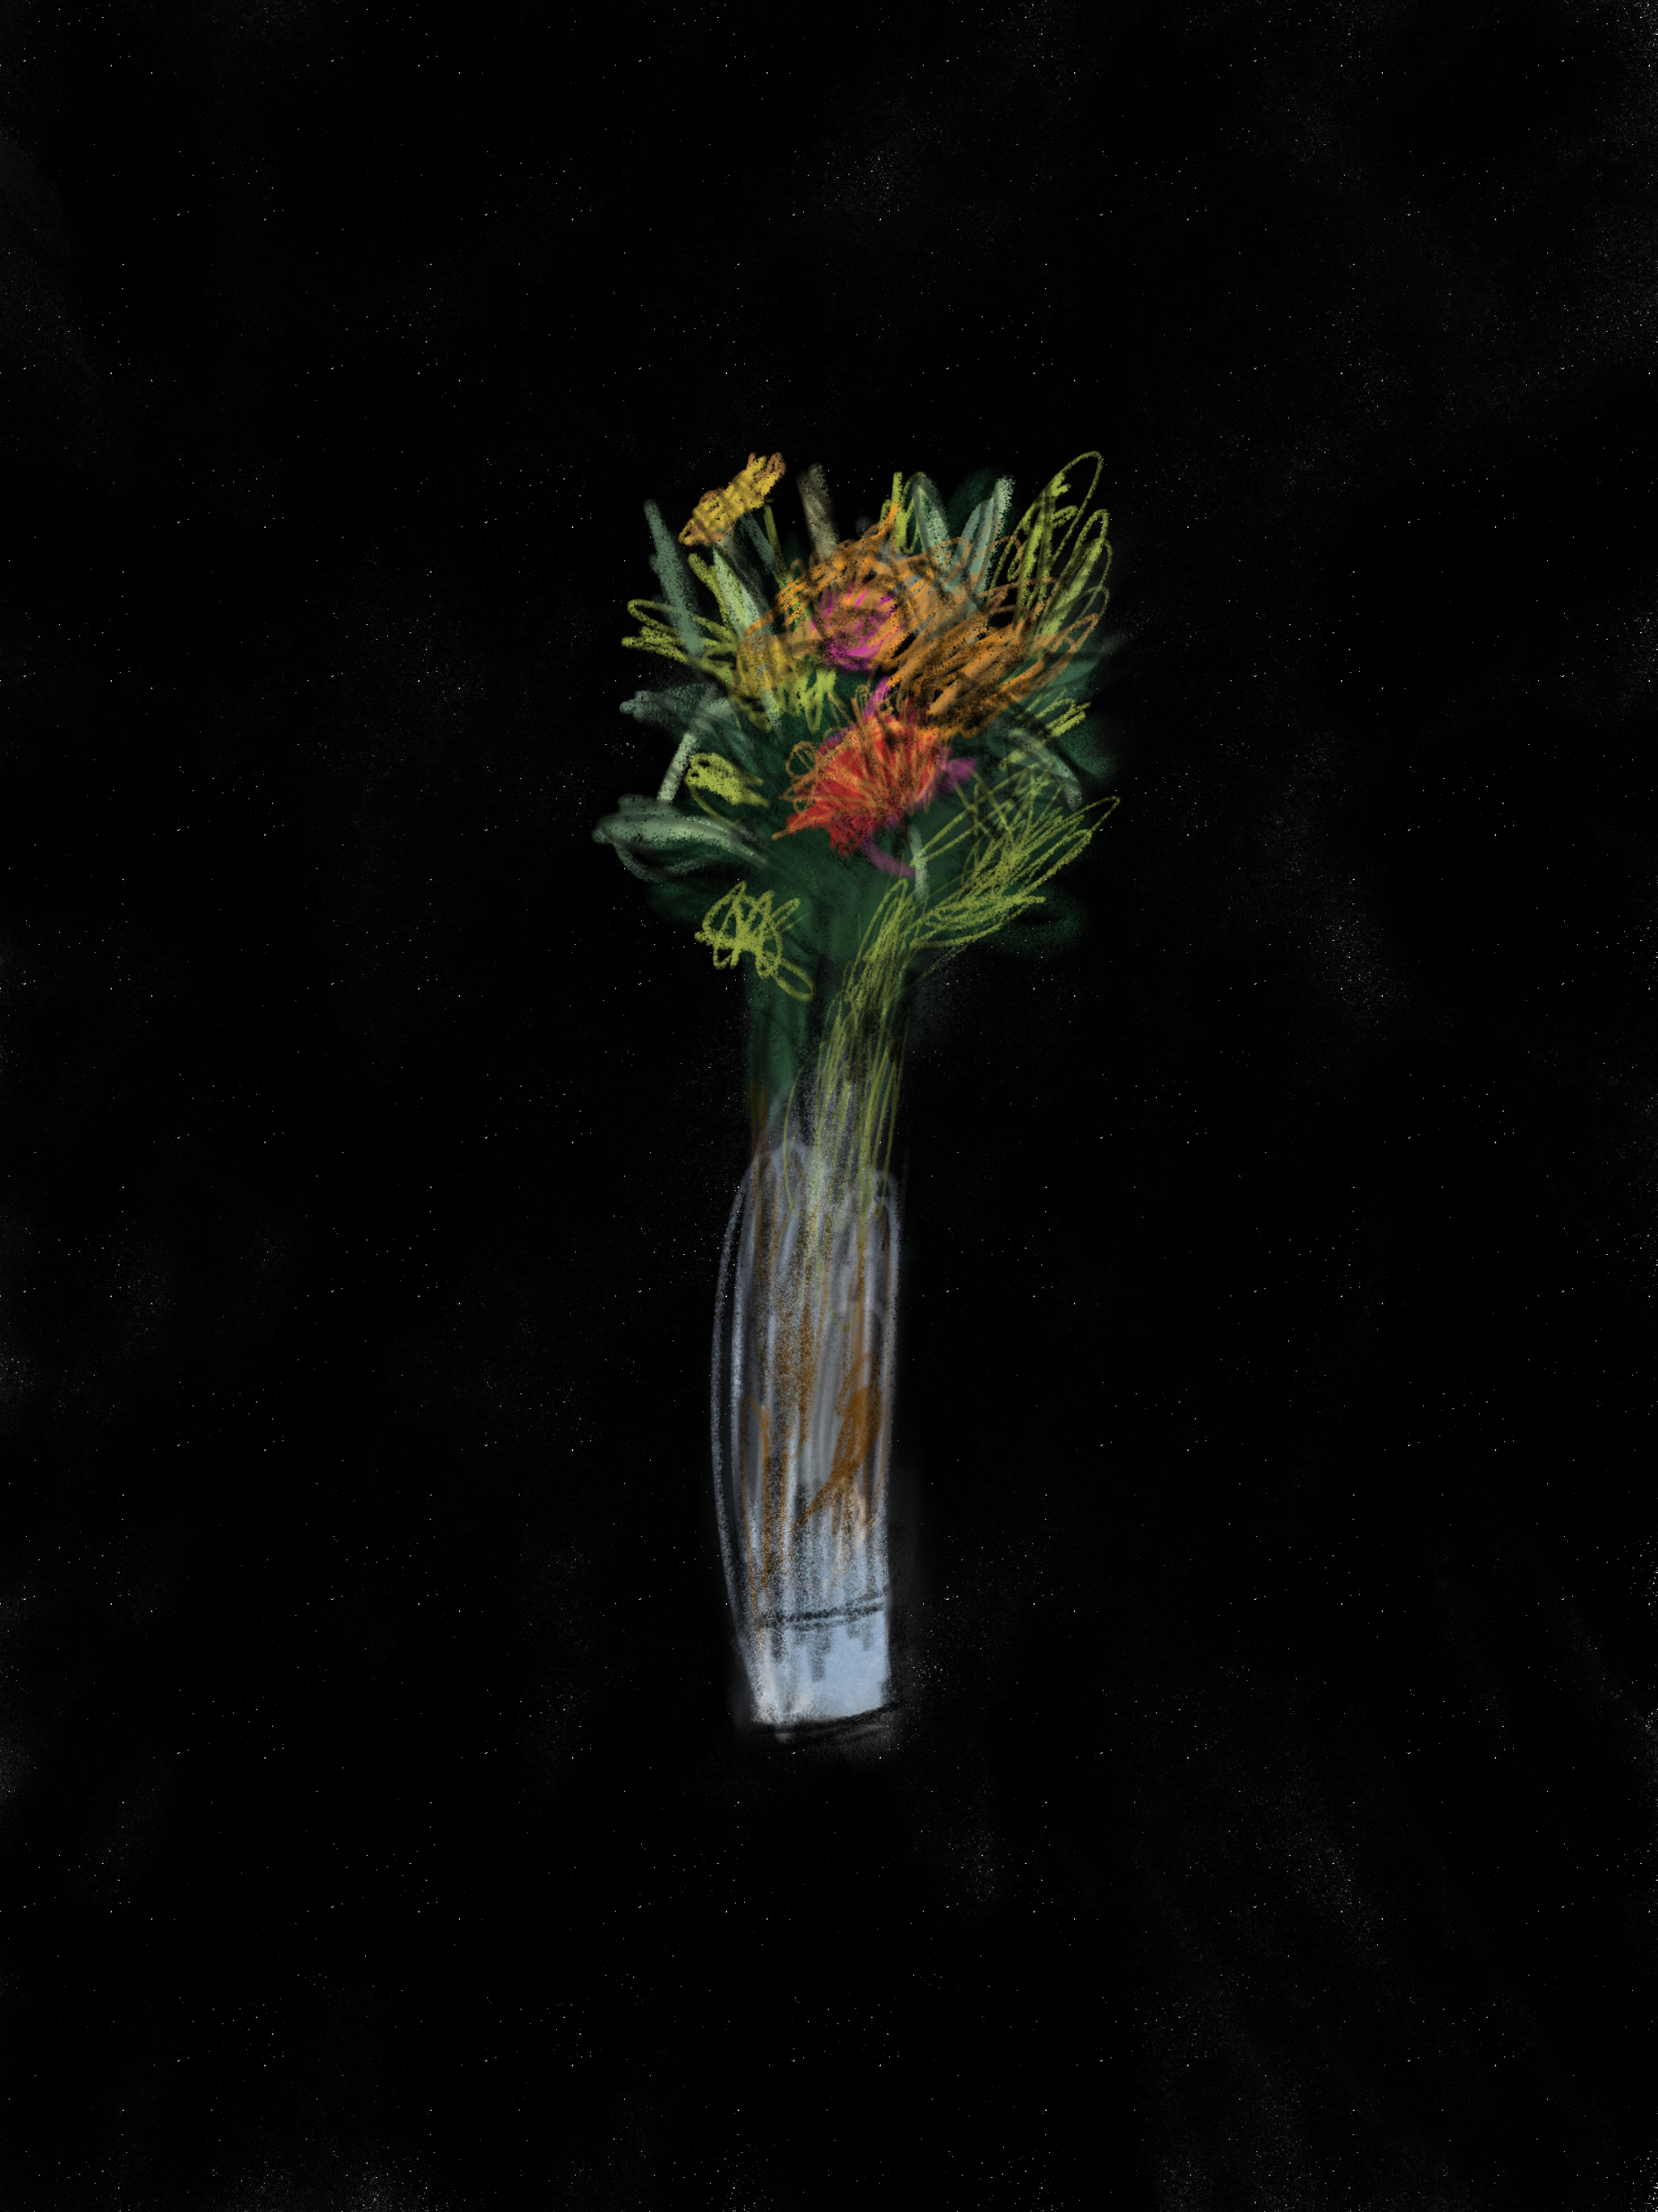 an expressive illustration of orange and yellow flowers in vase on black background